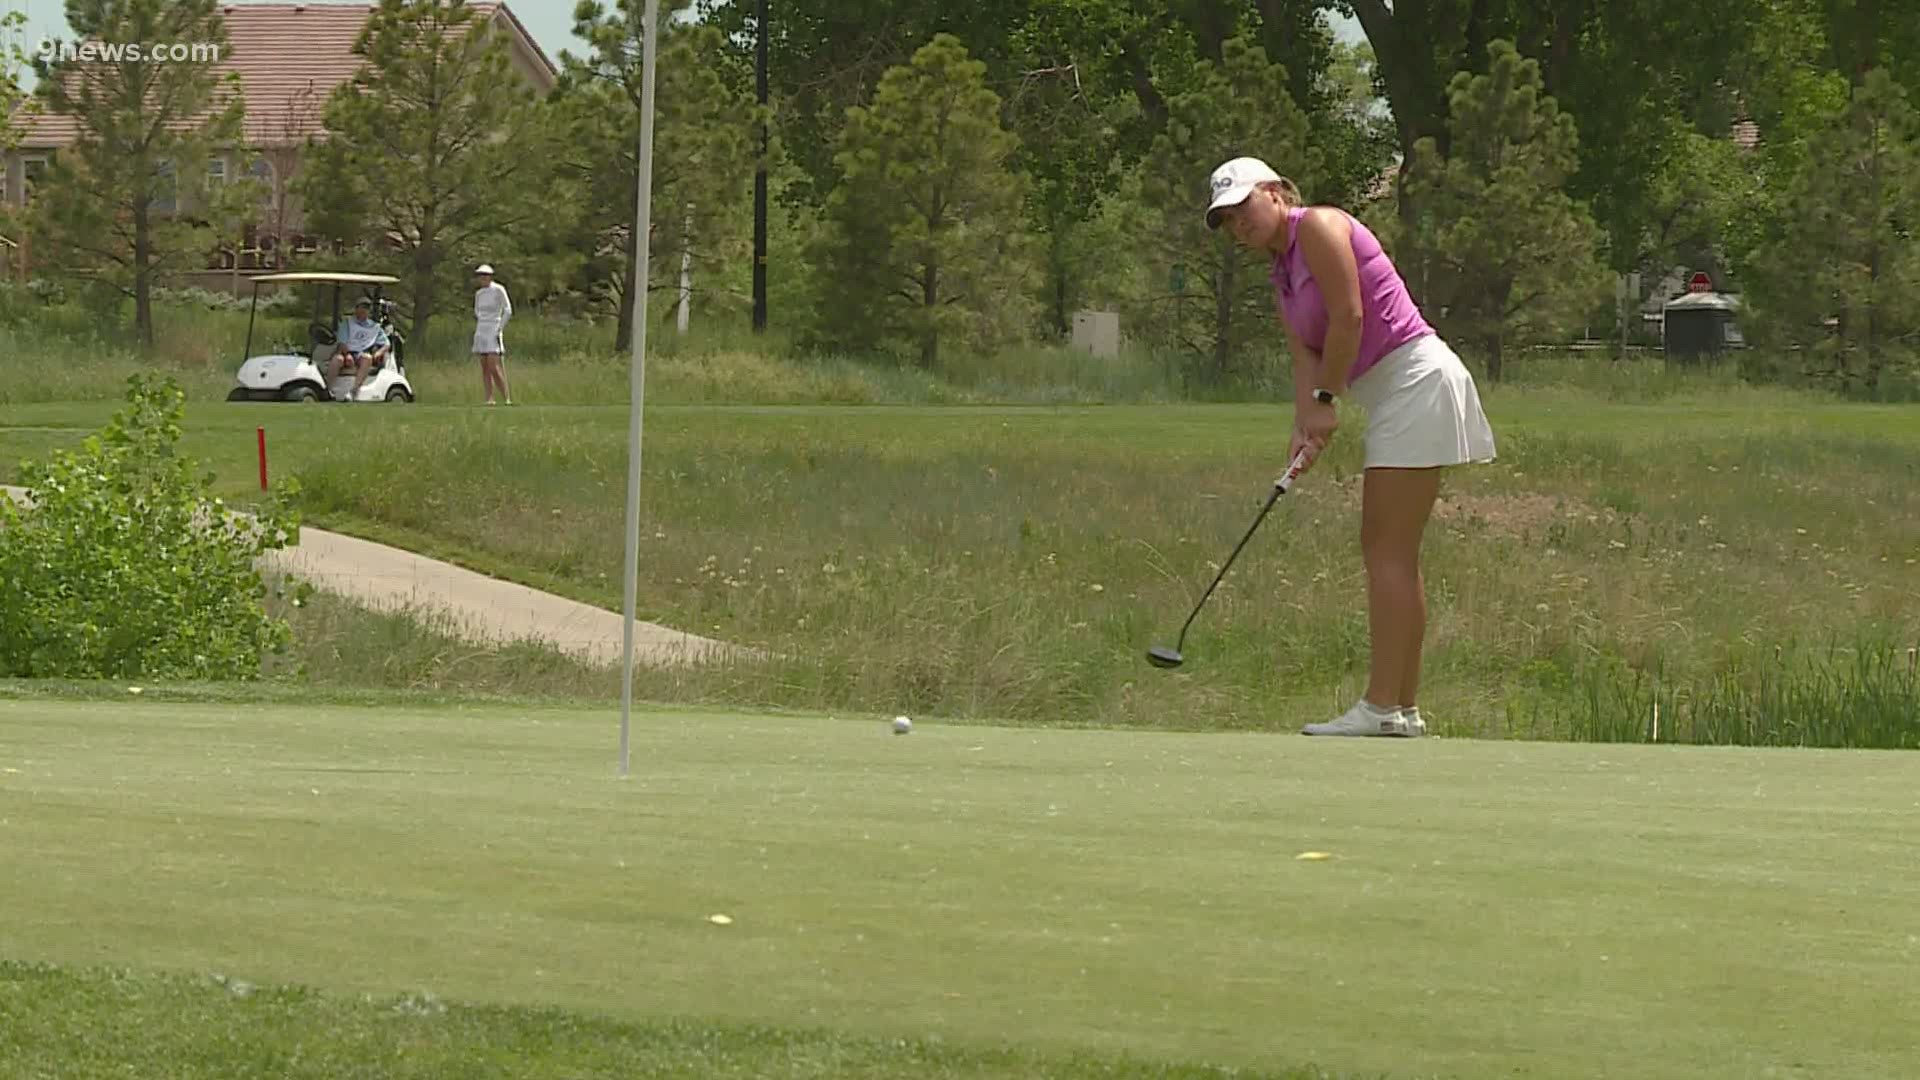 The homegrown golfer carded a 65 on Day Two of the Women's Colorado Open to lead at 12-under par.